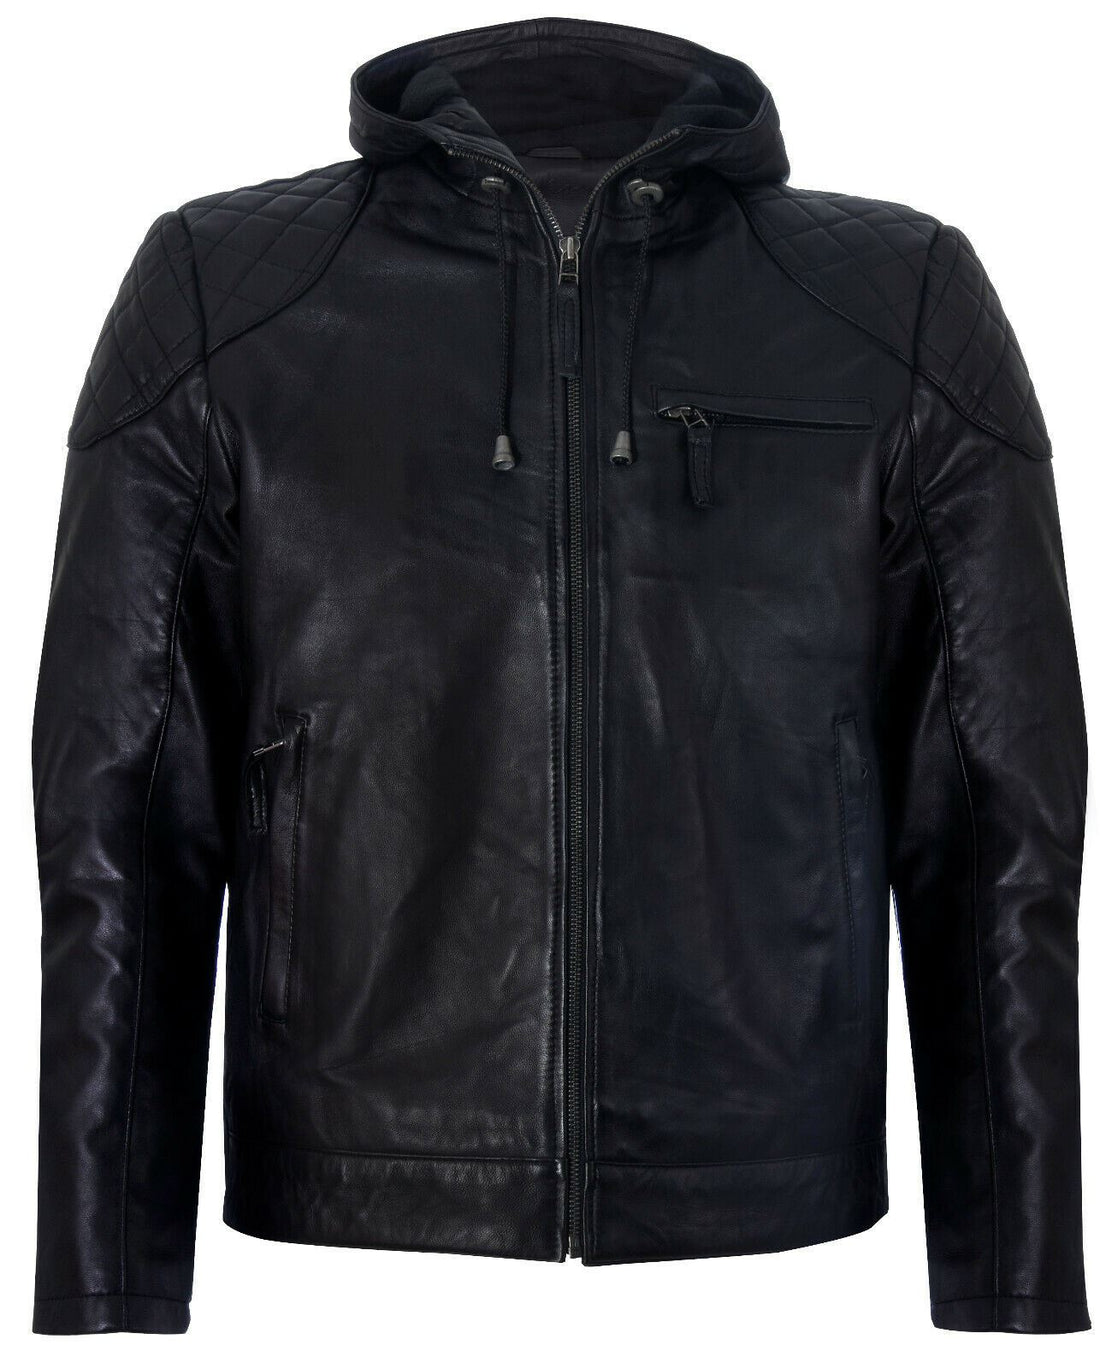 Mens Classic Hooded Leather Bomber Jacket-Chorleywood - Upperclass Fashions 